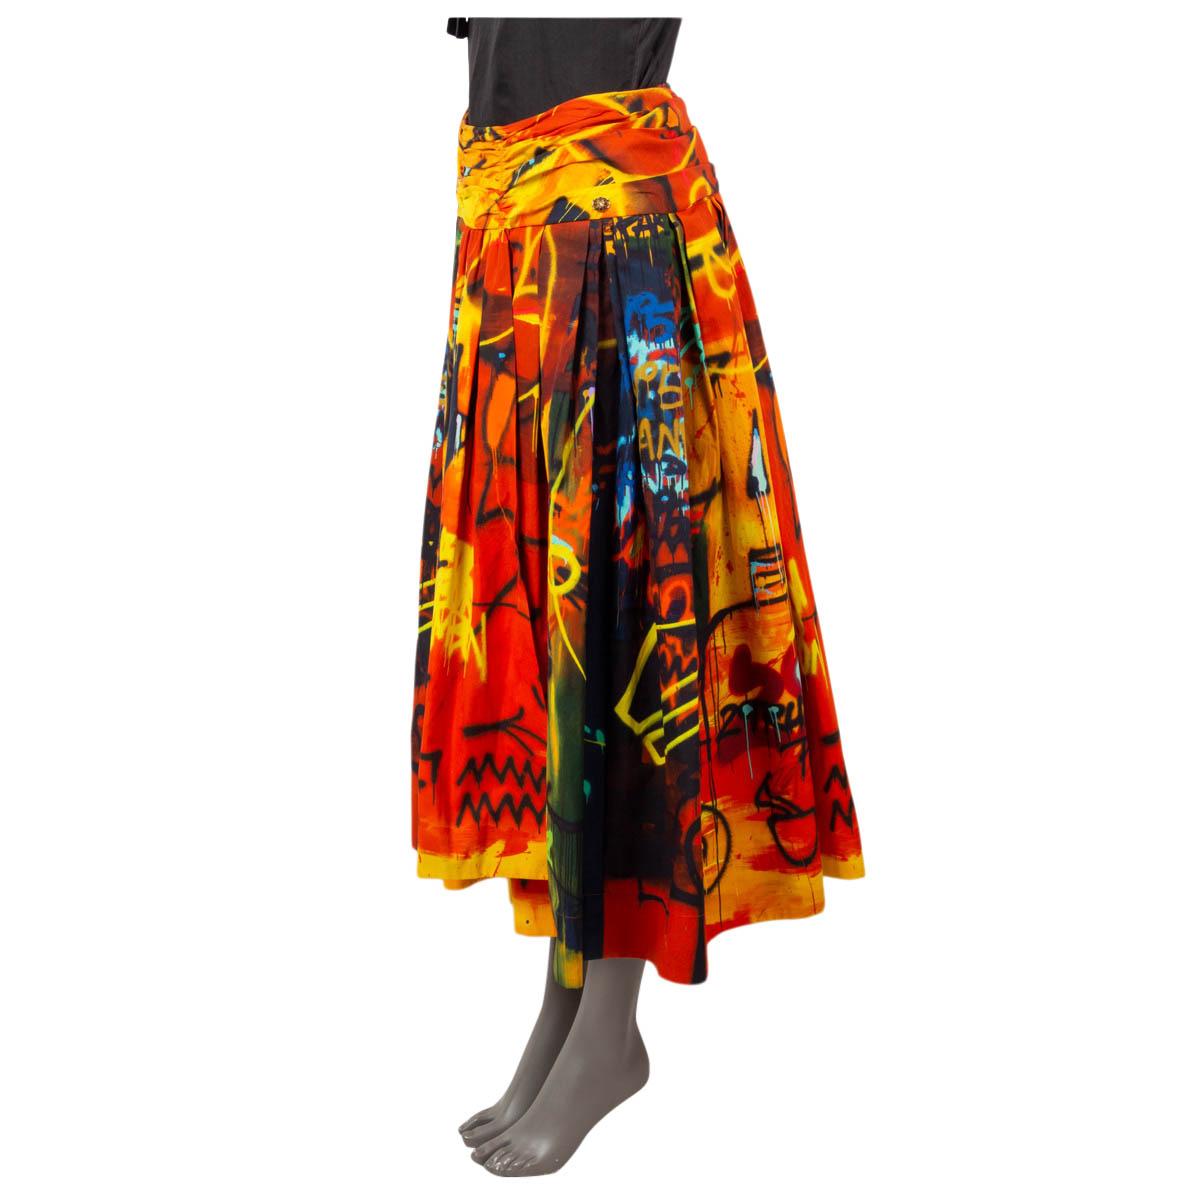 100% authentic Chanel 2019 New York graffiti print flared cotton (100%) midi skirt in orange, black, green, turquoise, blue, yellow and red. The pleated design features a shorter apron detail at front and slit side-pockets. Opens with a zipper at